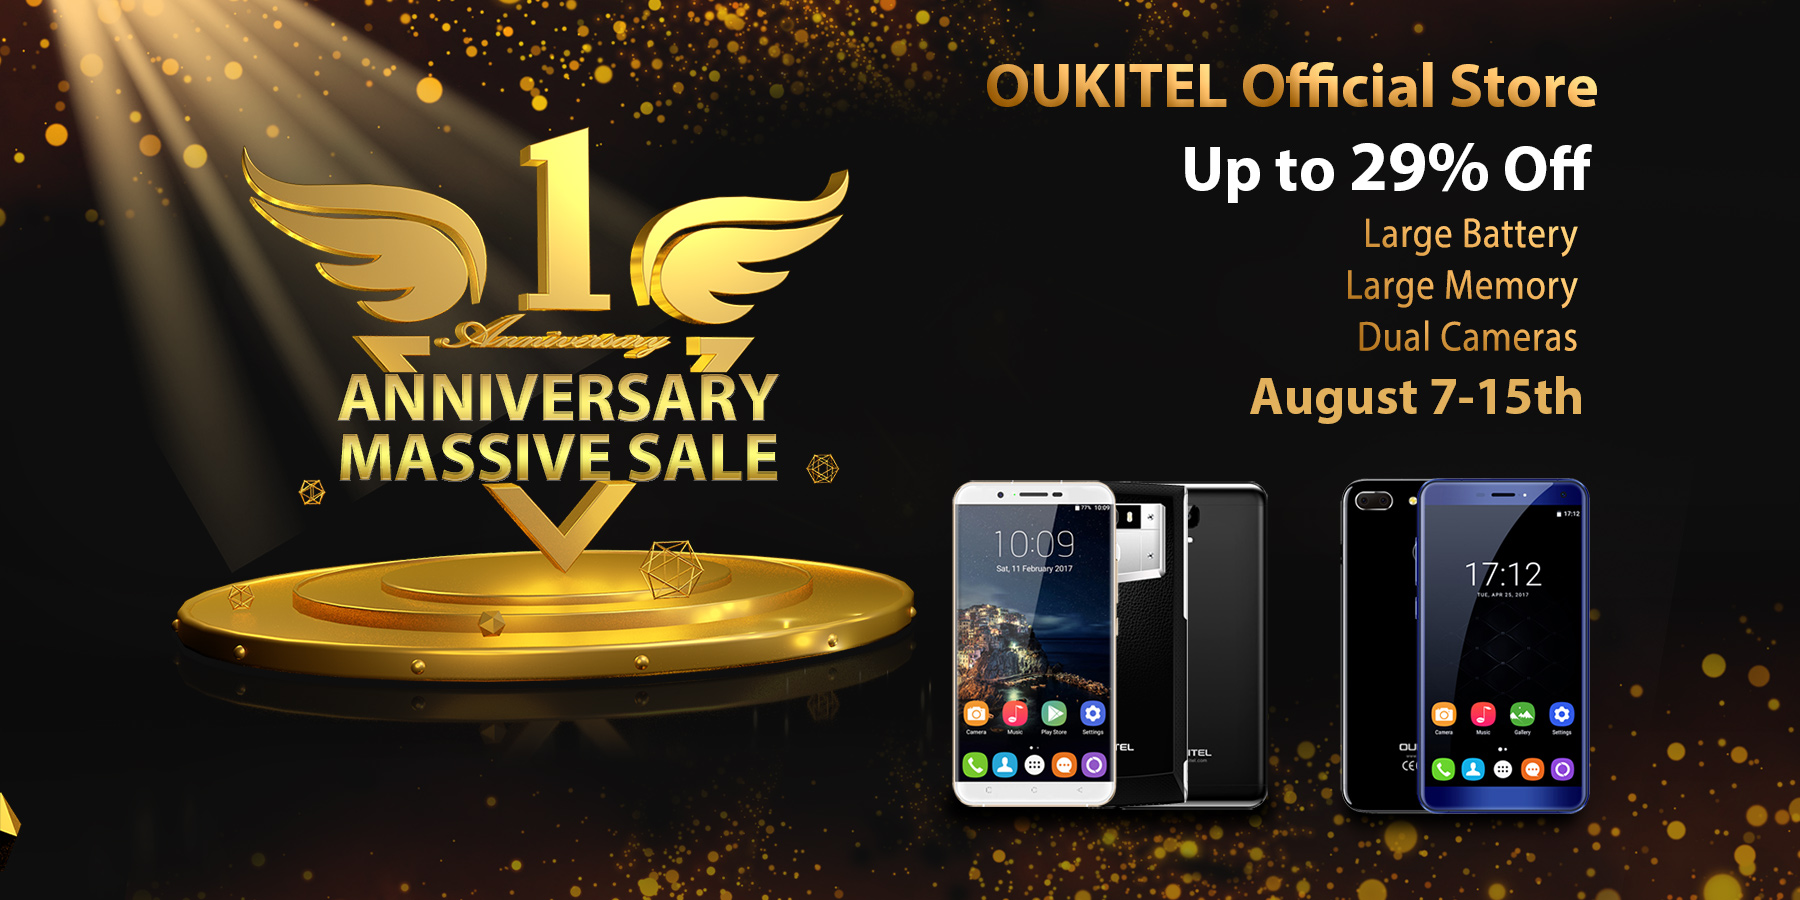 The smartphone maker is celebrating the birthday of a major sale